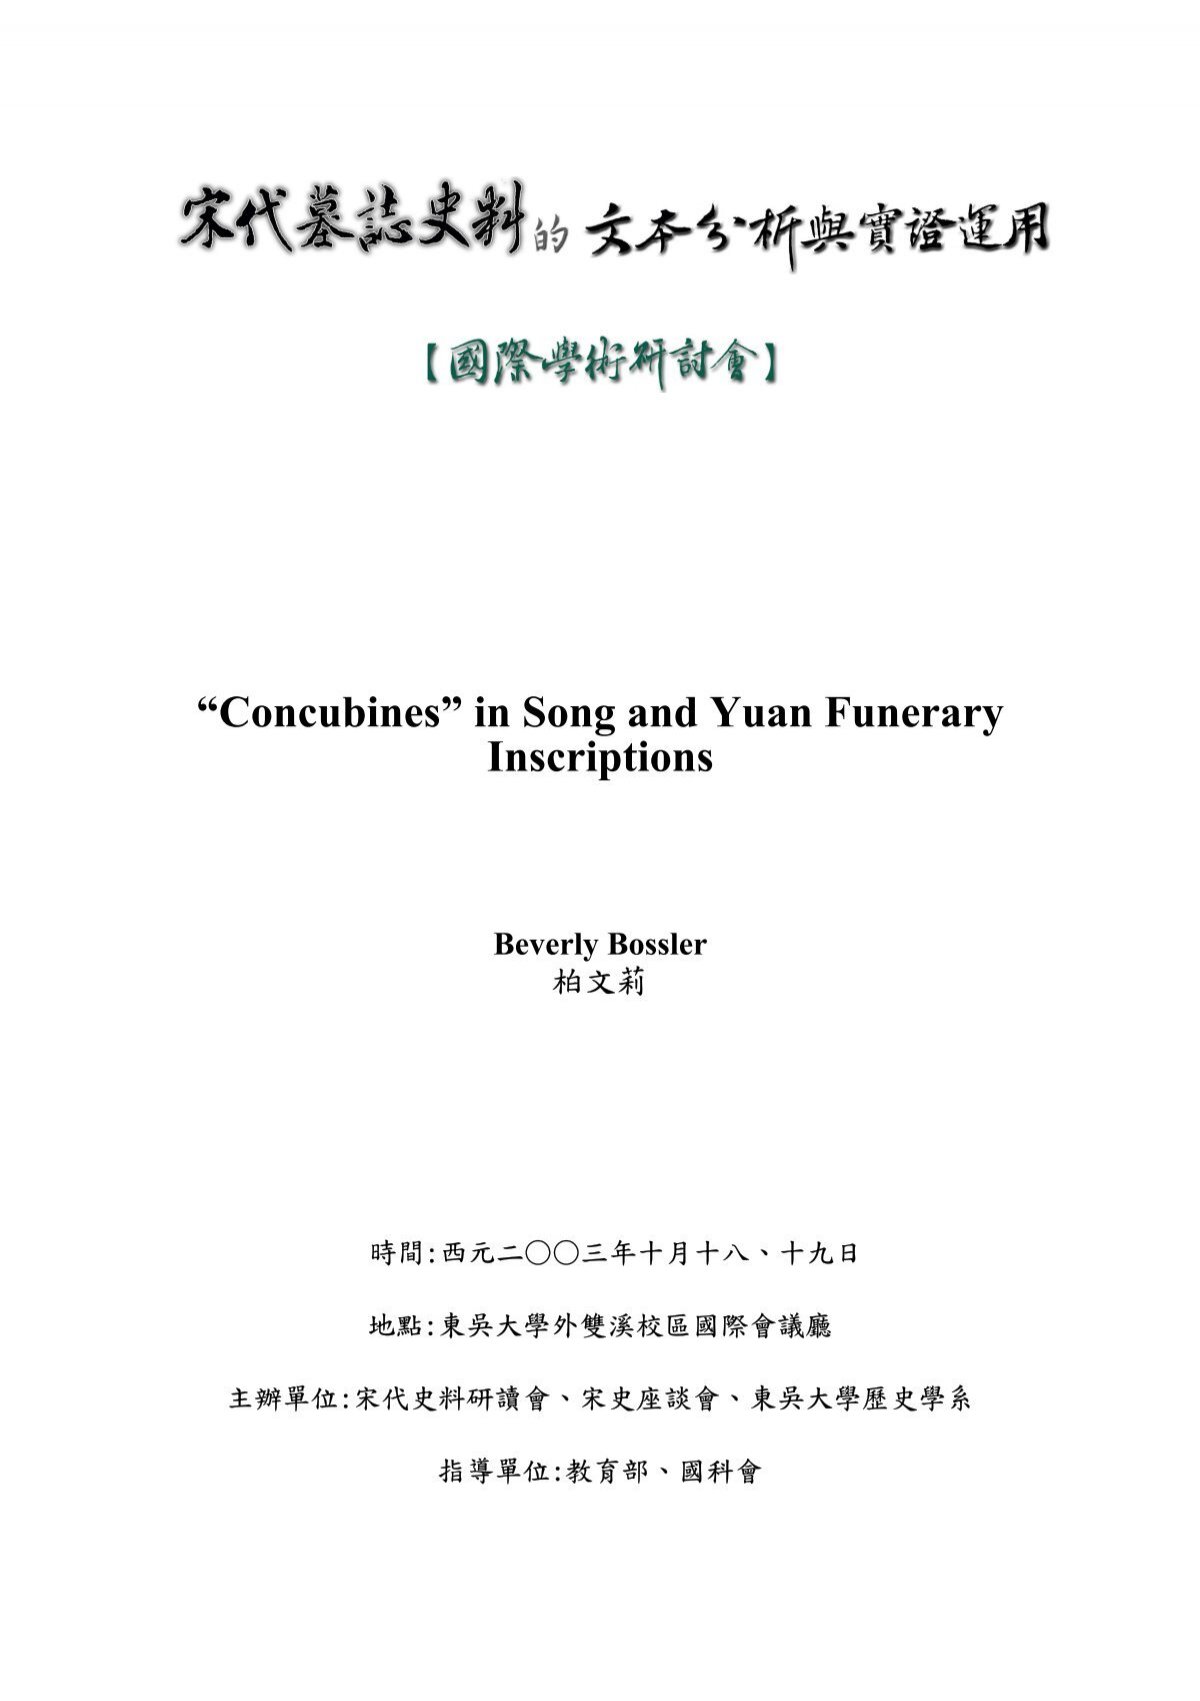 A œconcubinesa In Song And Yuan Funerary Inscriptions